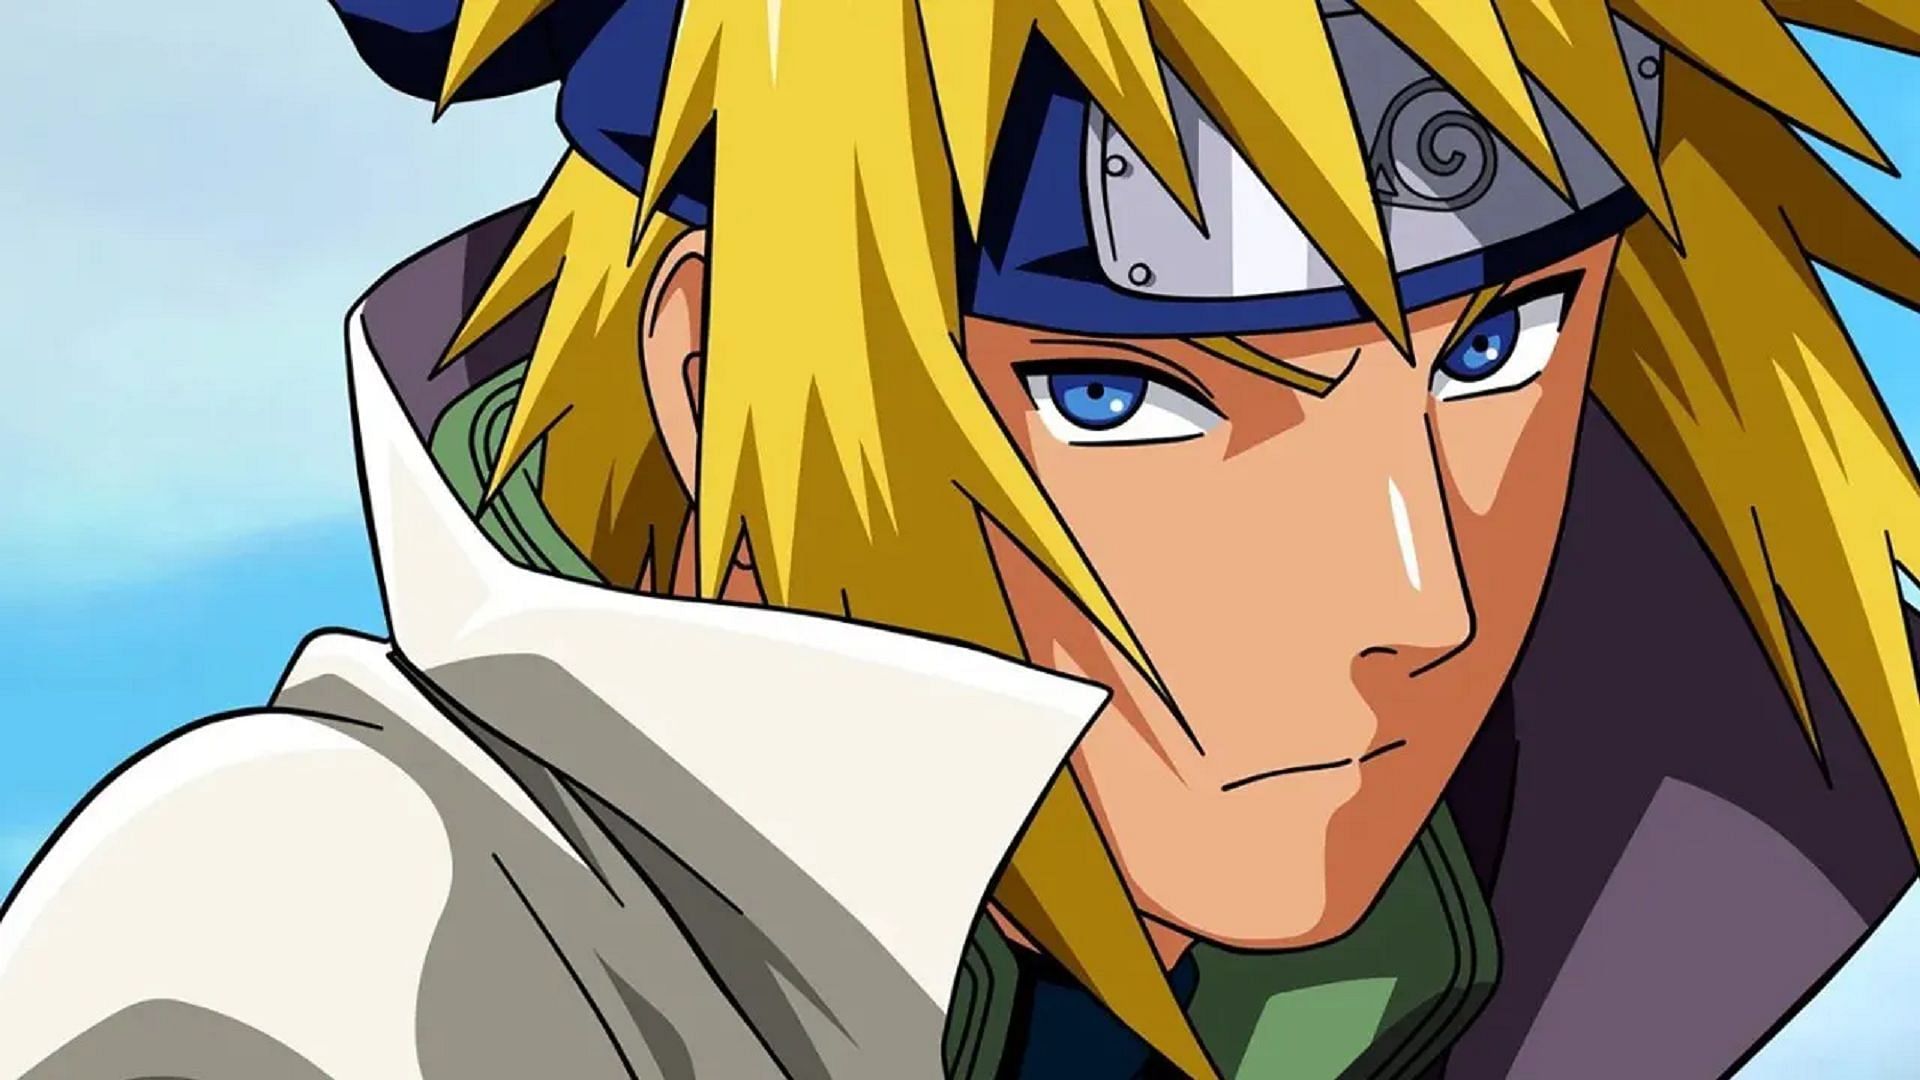 As the renowned Fourth Hokage and the father of the main protagonist, Minato is a major character in the Naruto franchise (Image via Studio Pierrot, Naruto)